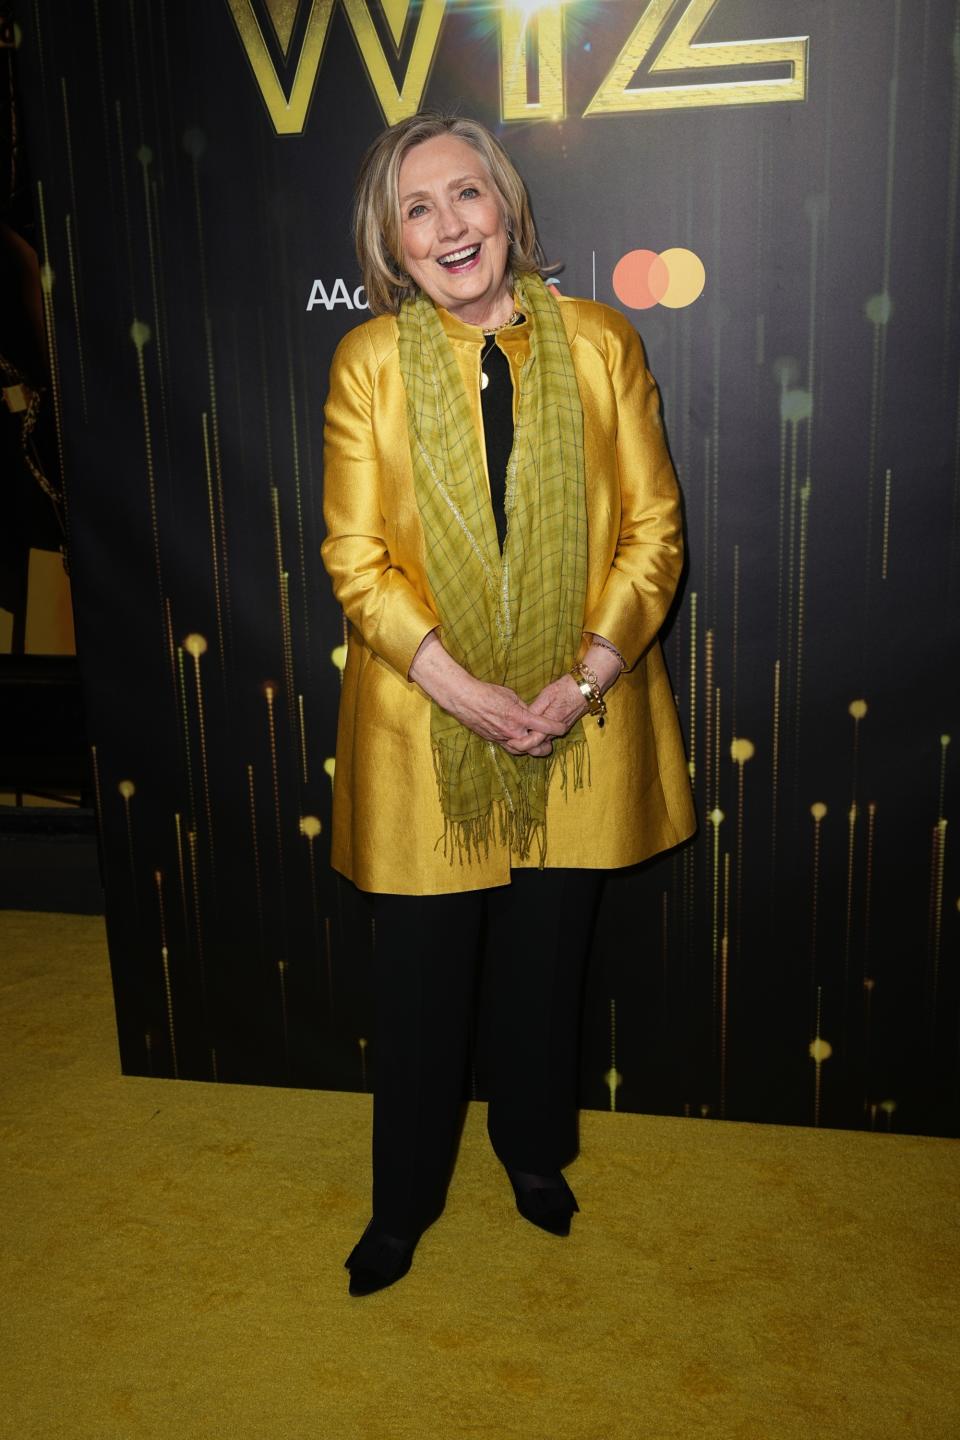 Hillary Clinton at the opening night of 'The Wiz' in New York City on April 17.